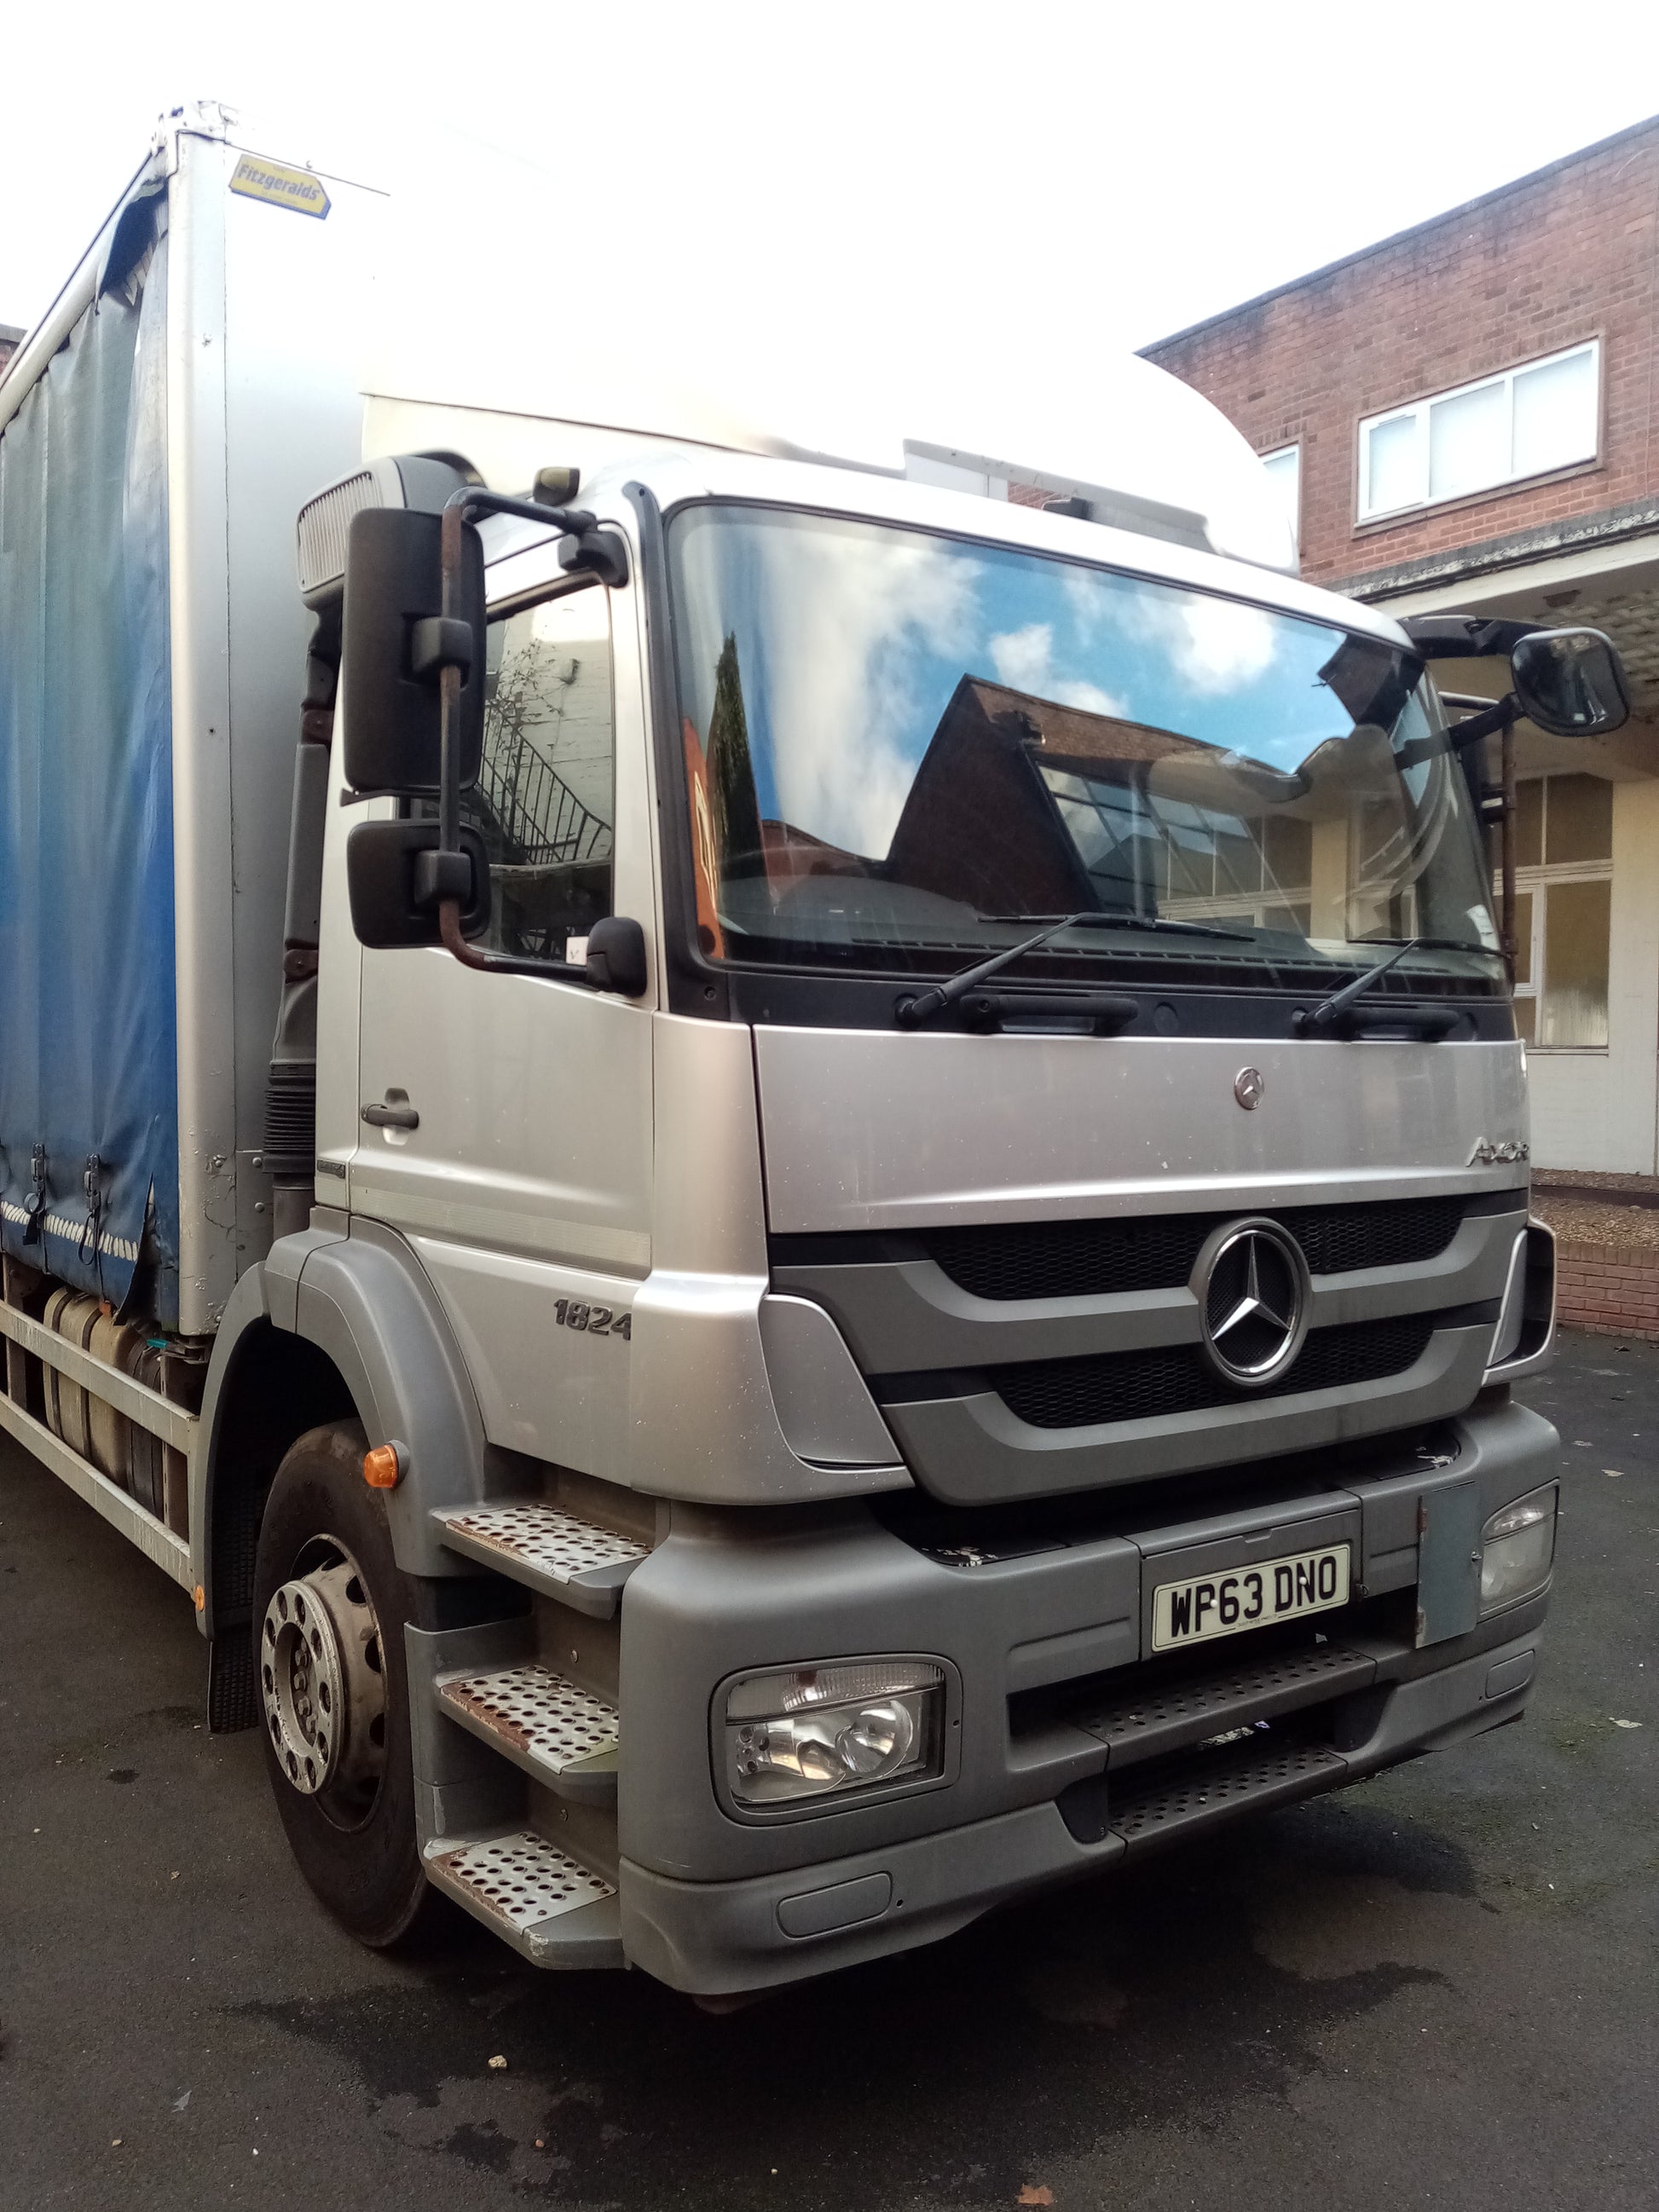 Bid on 18 TON MERCEDES AXOR AUTO LOW MILEAGE- Buy &amp; Sell on Auction with EAMA Group